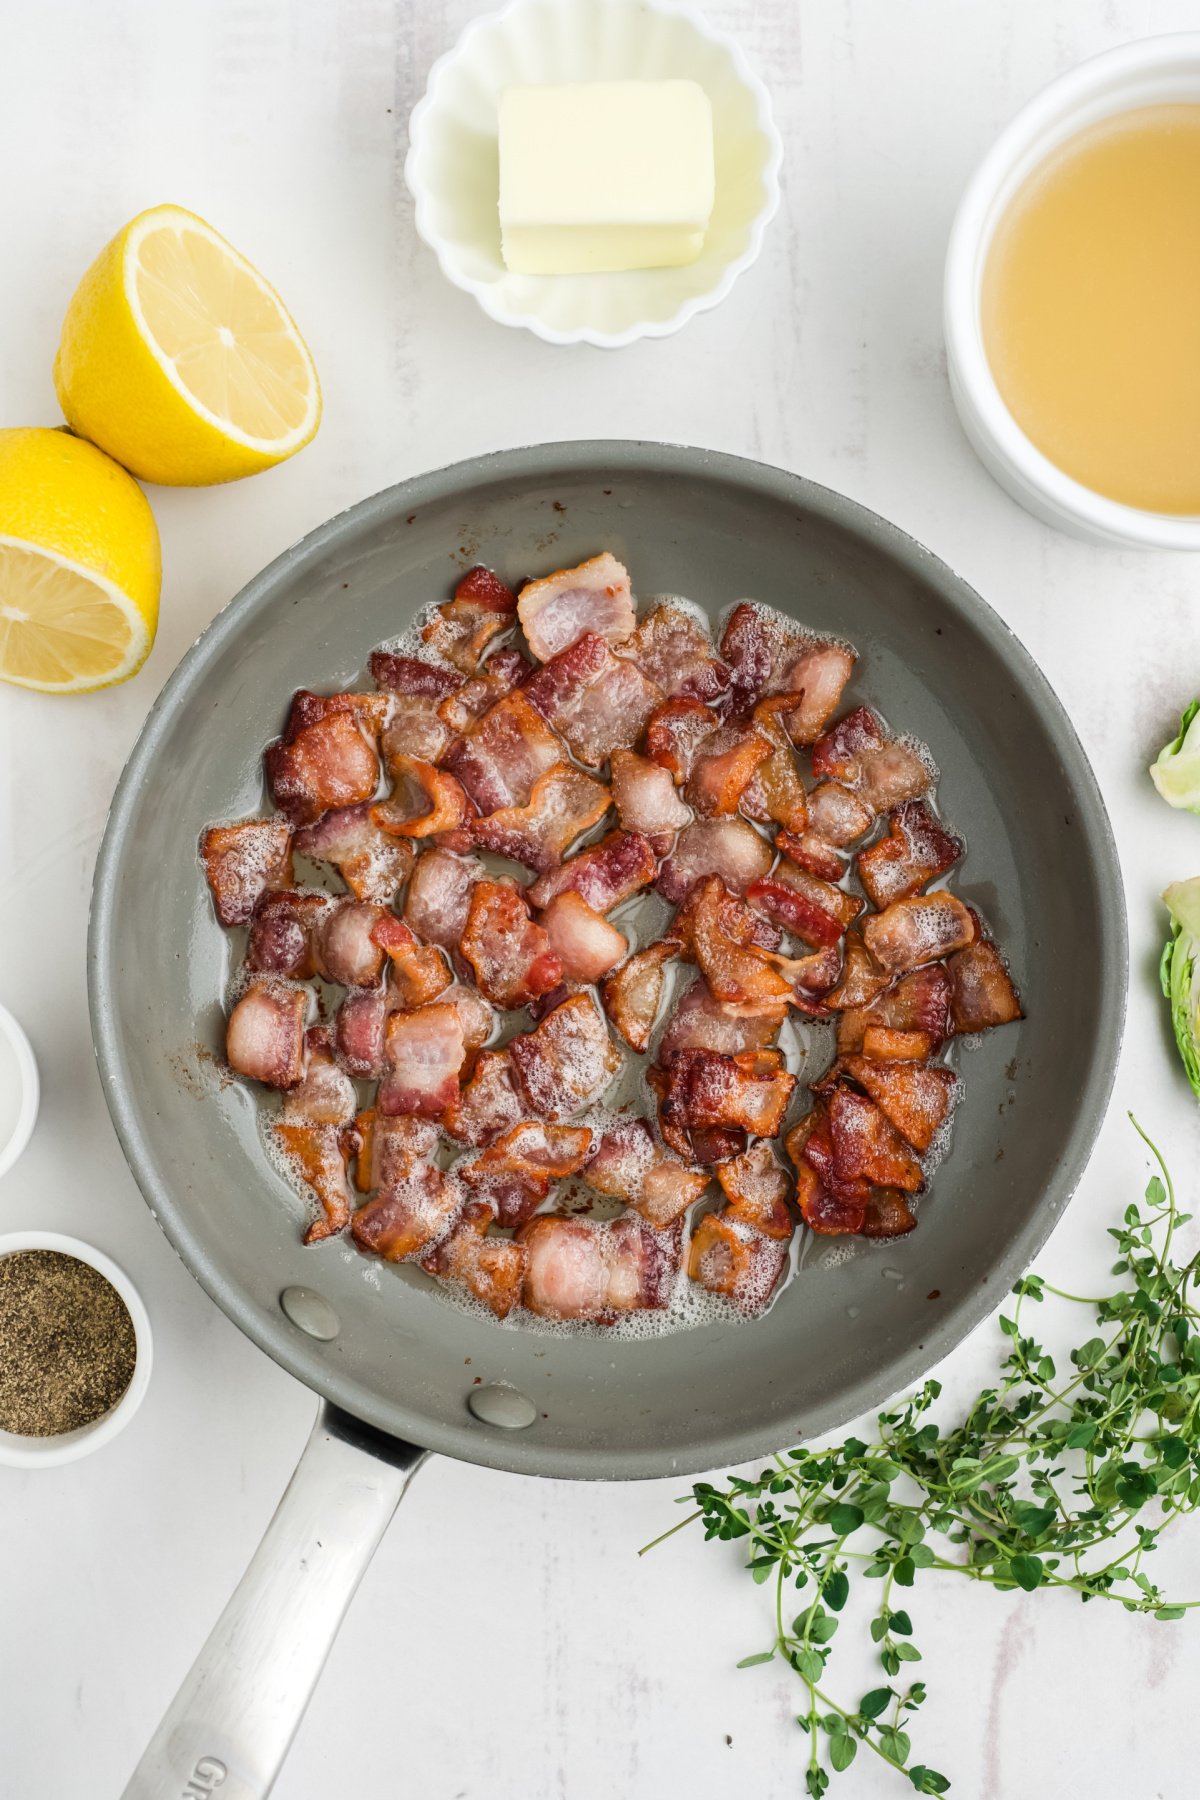 Bacon cooking in a skillet on the table.